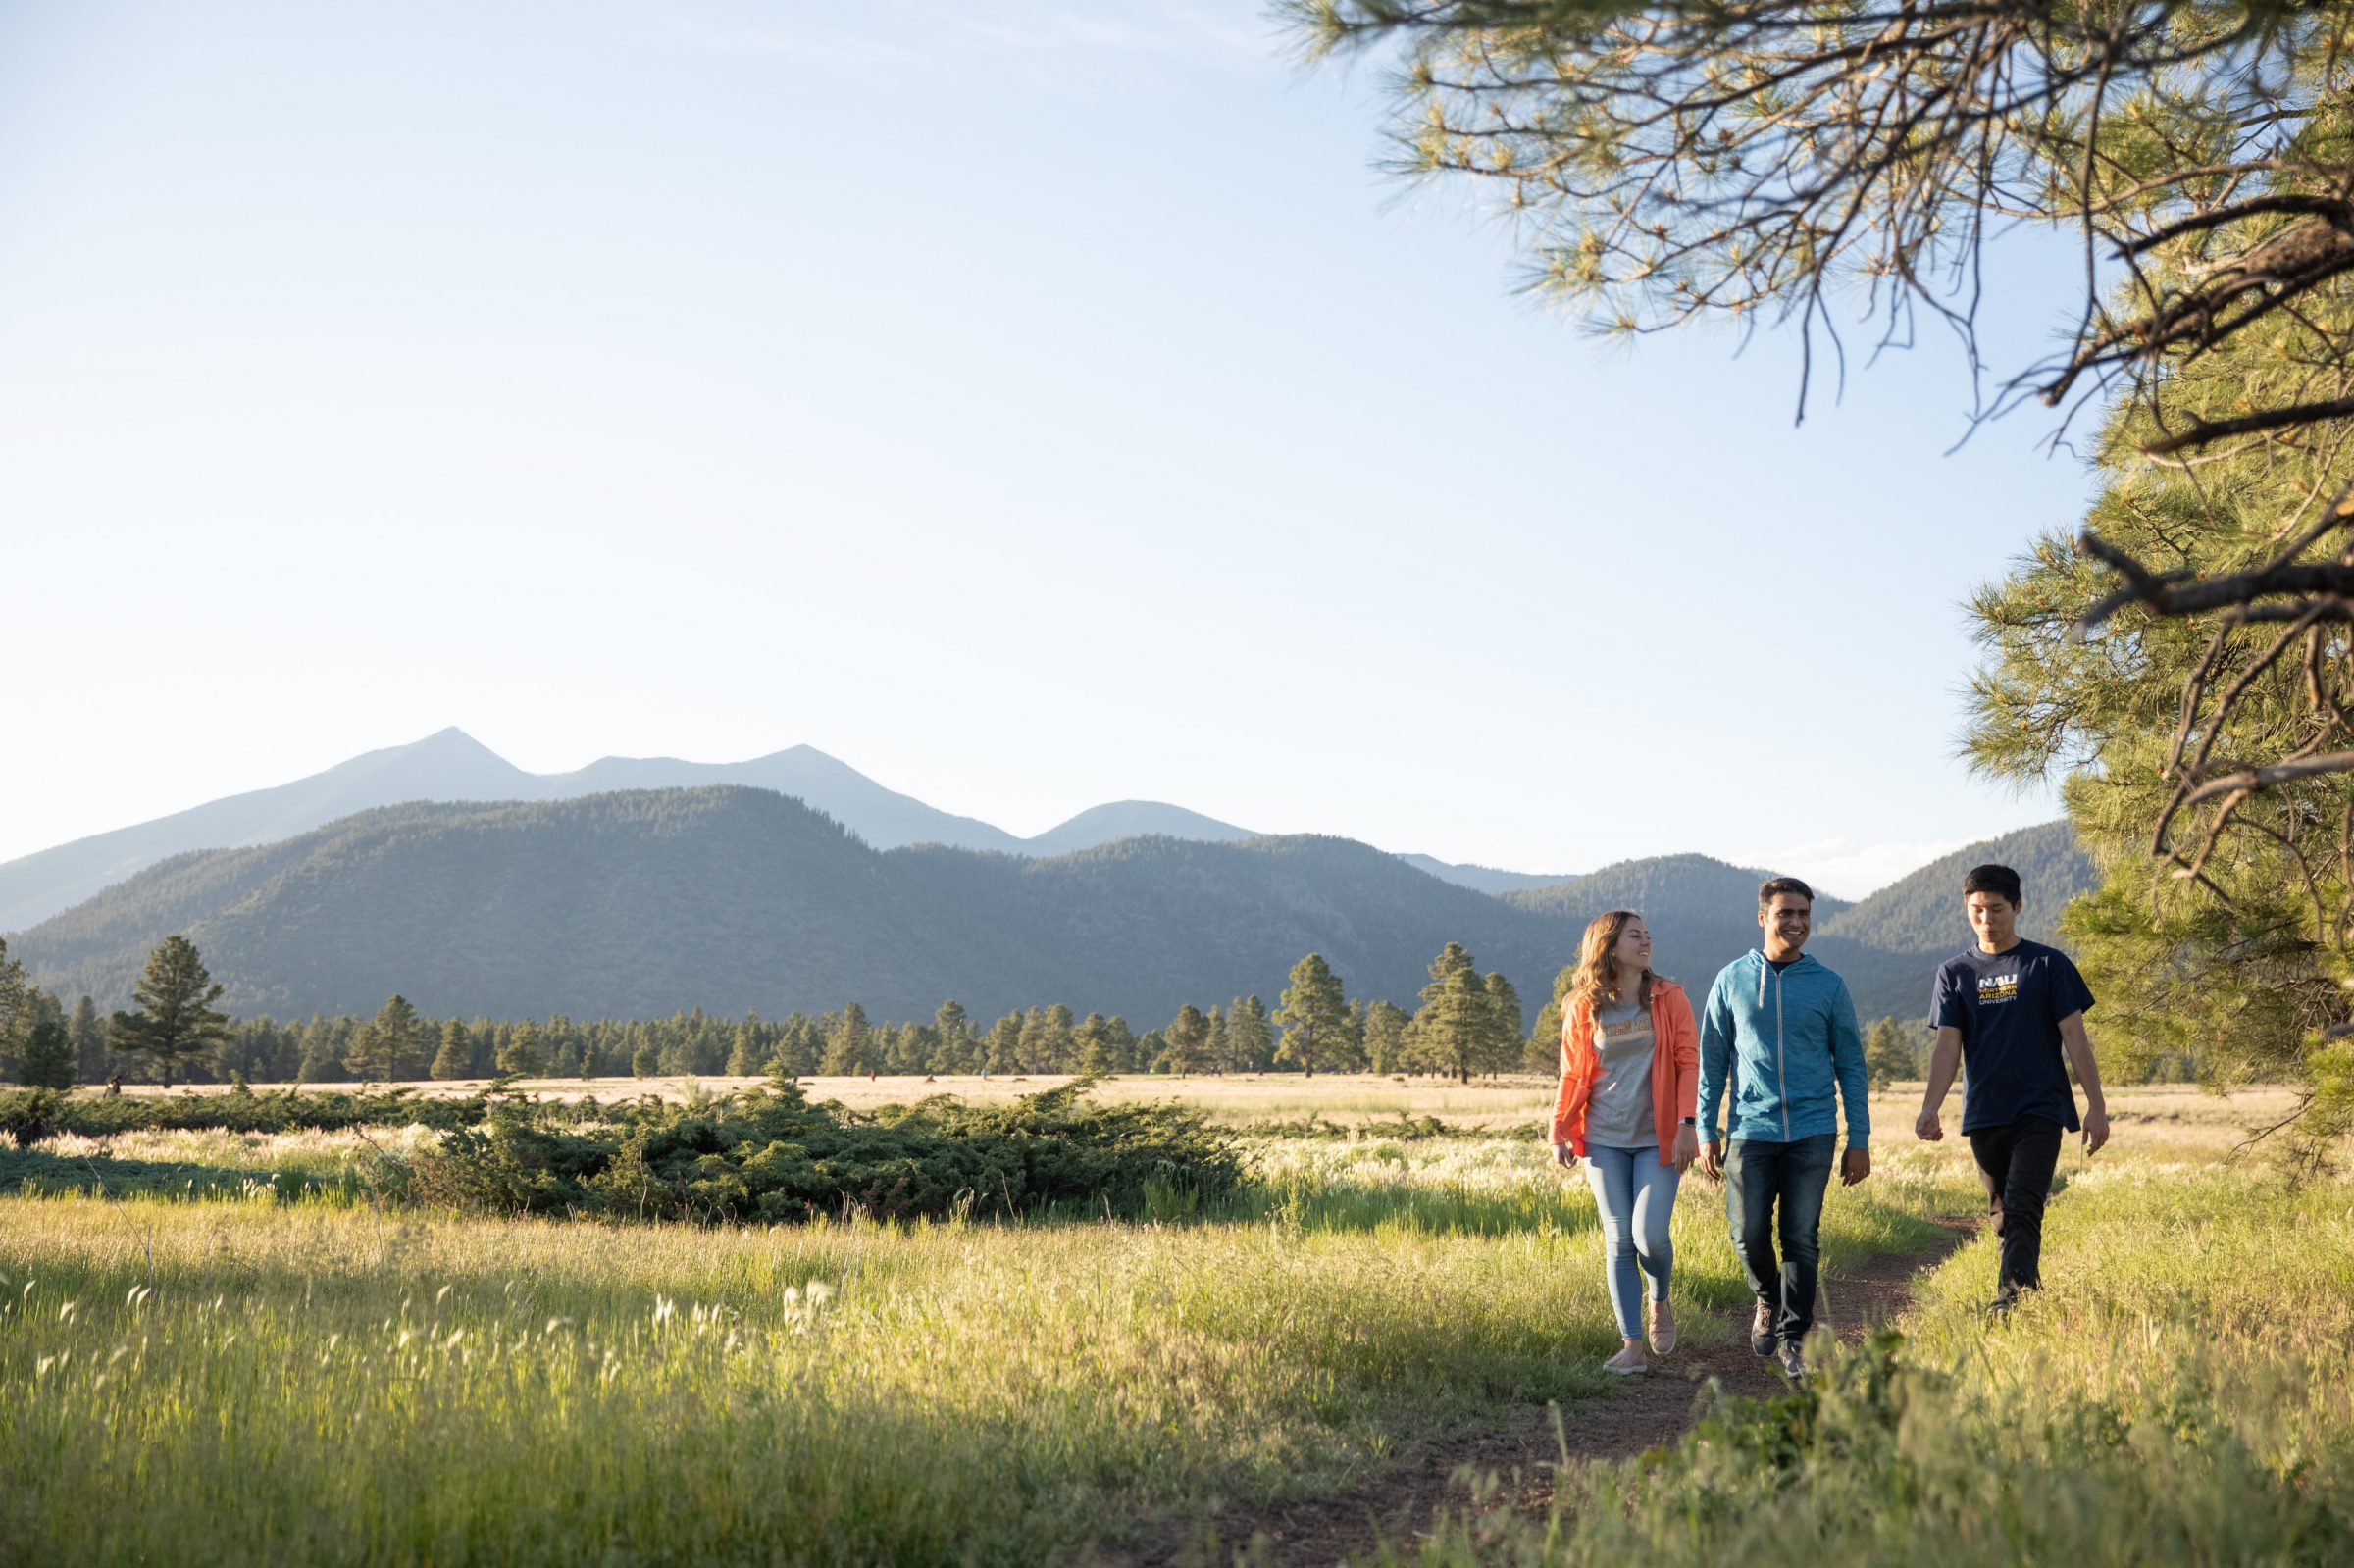 Three people on a hiking trail with mountains in the background.